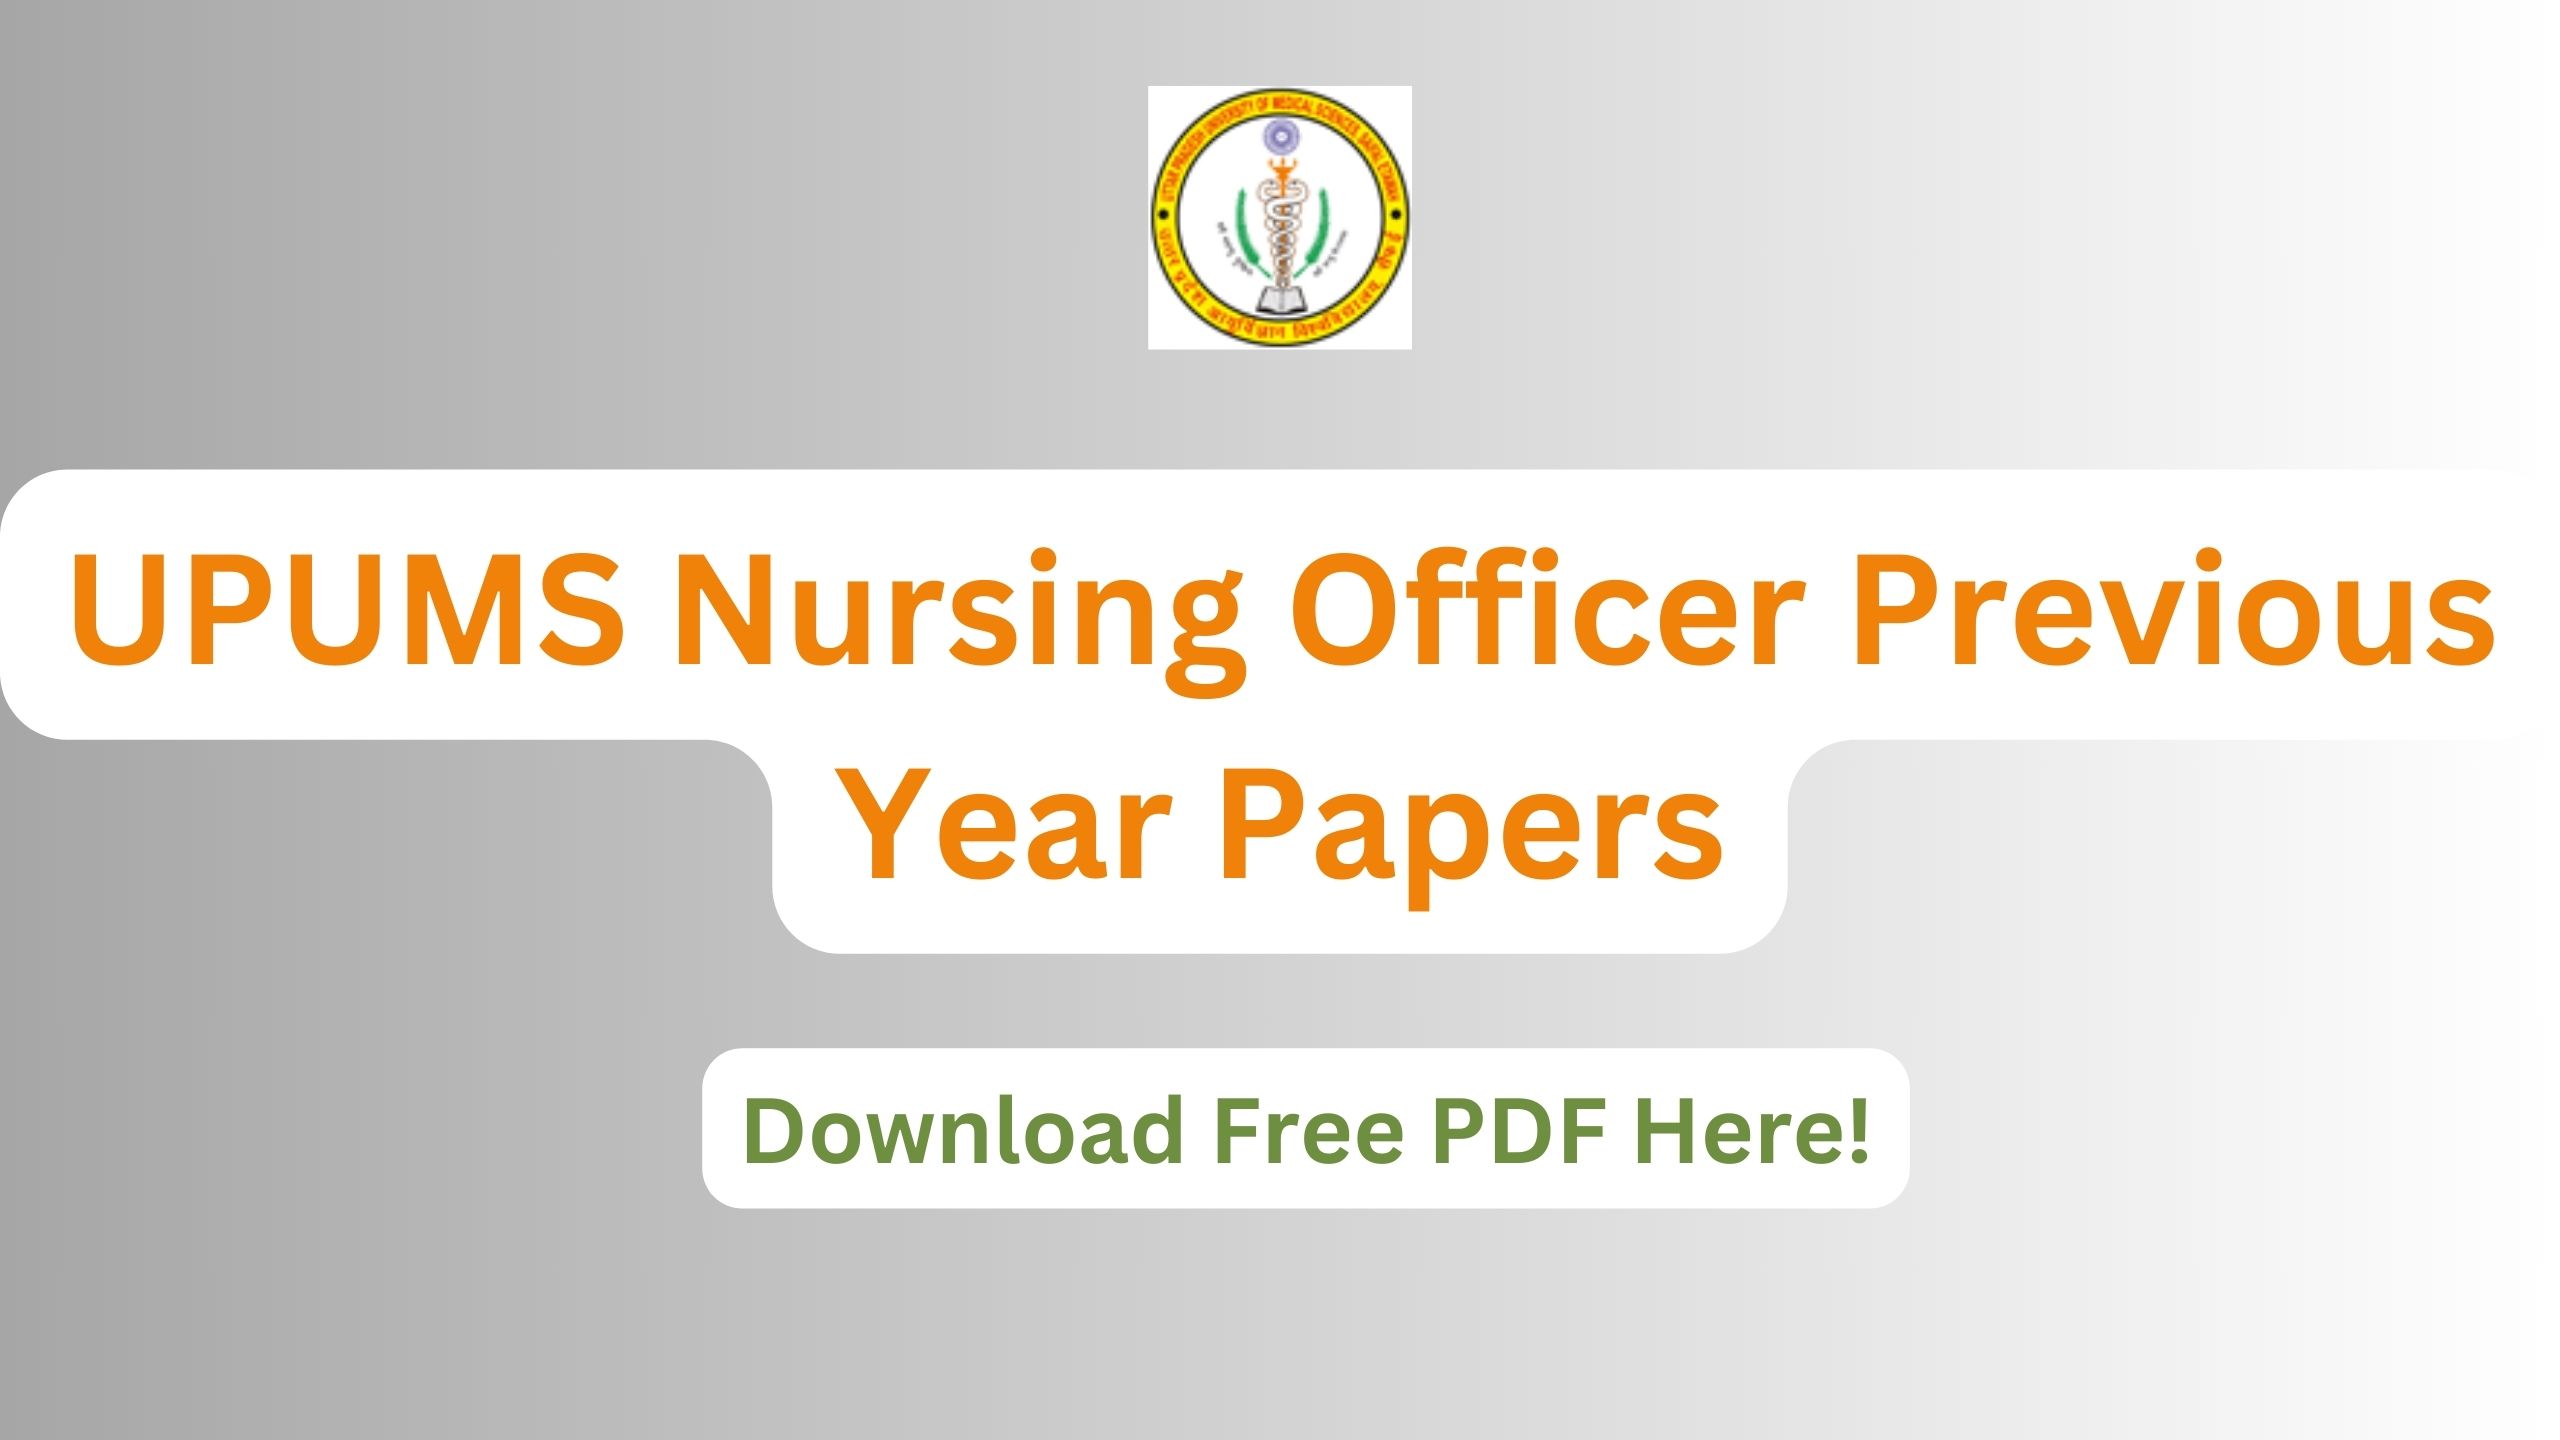 UPUMS Nursing Officer Previous Year Papers